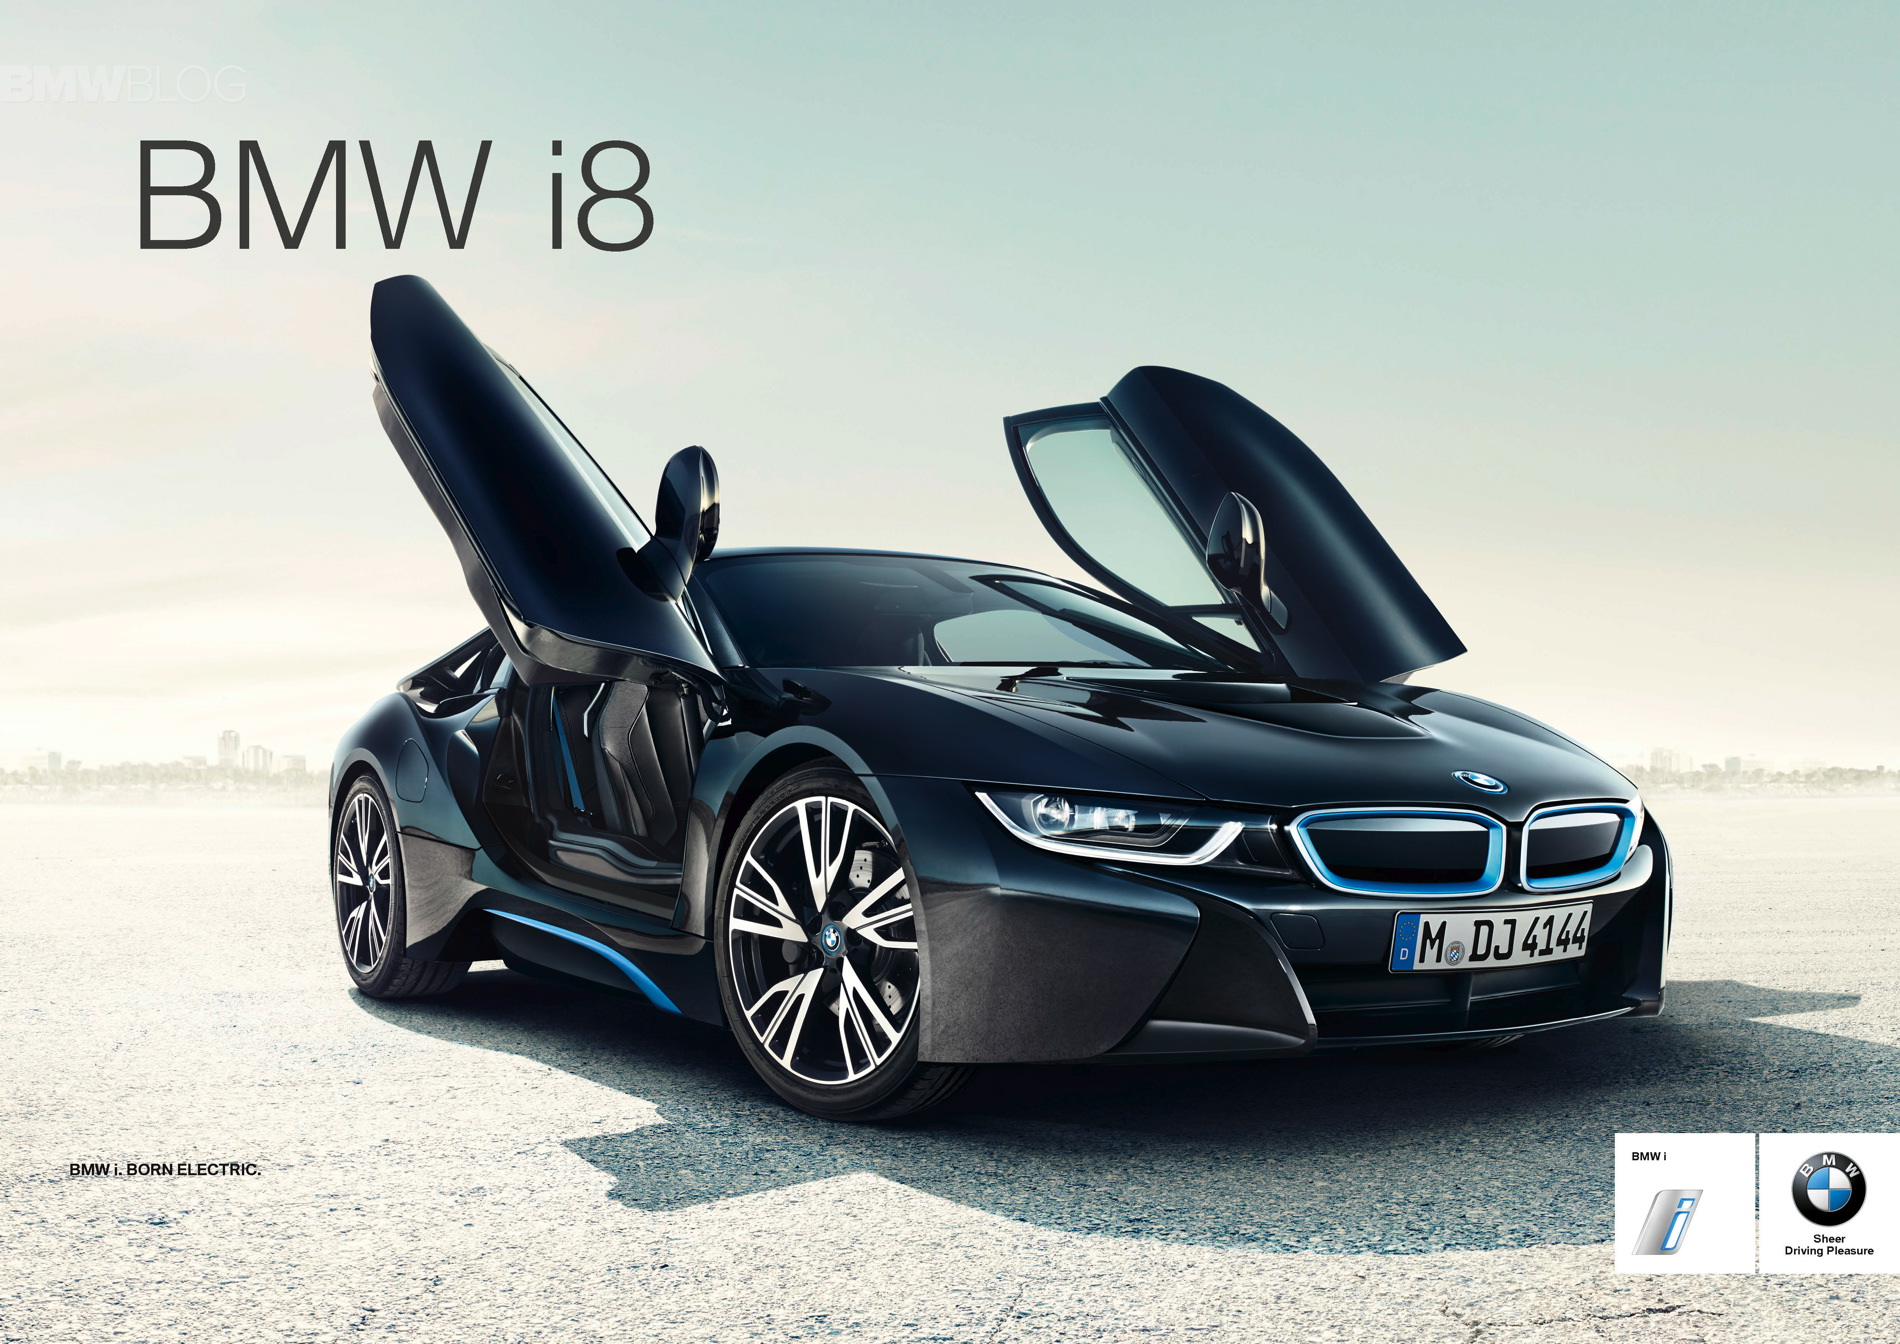 Global-launch-campaign-for-BMW-i8-02.jpg